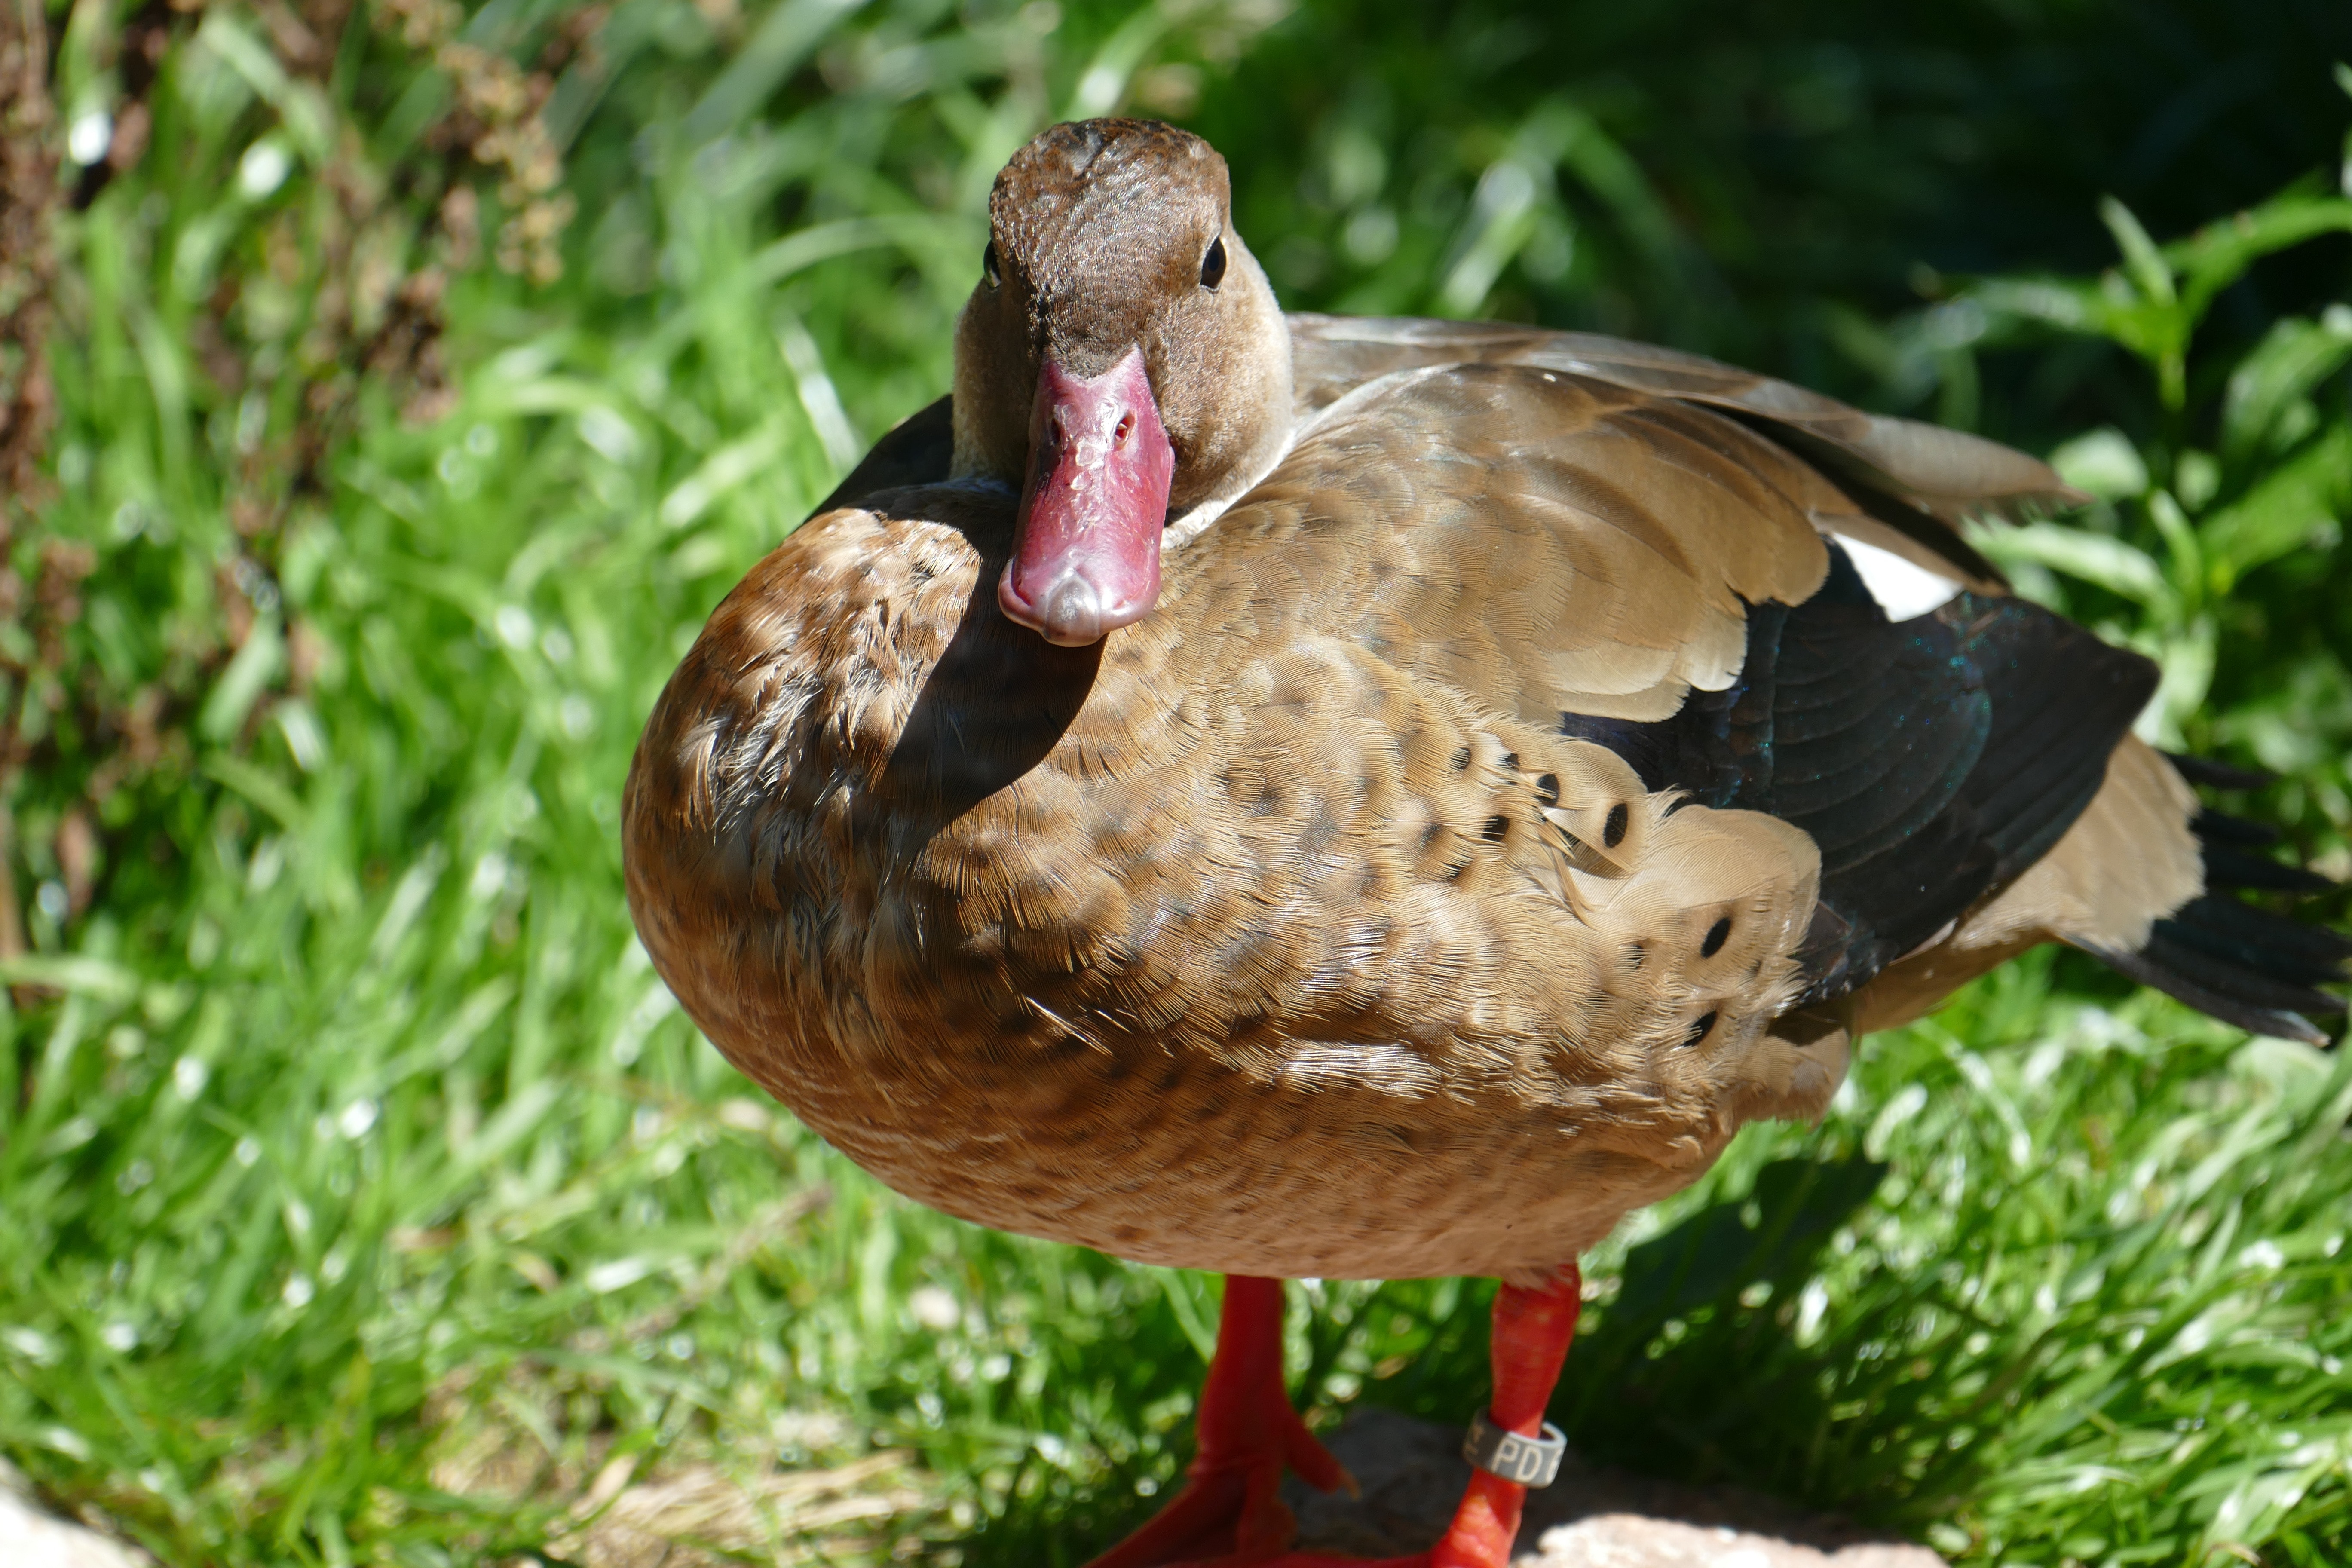 brown and black duck